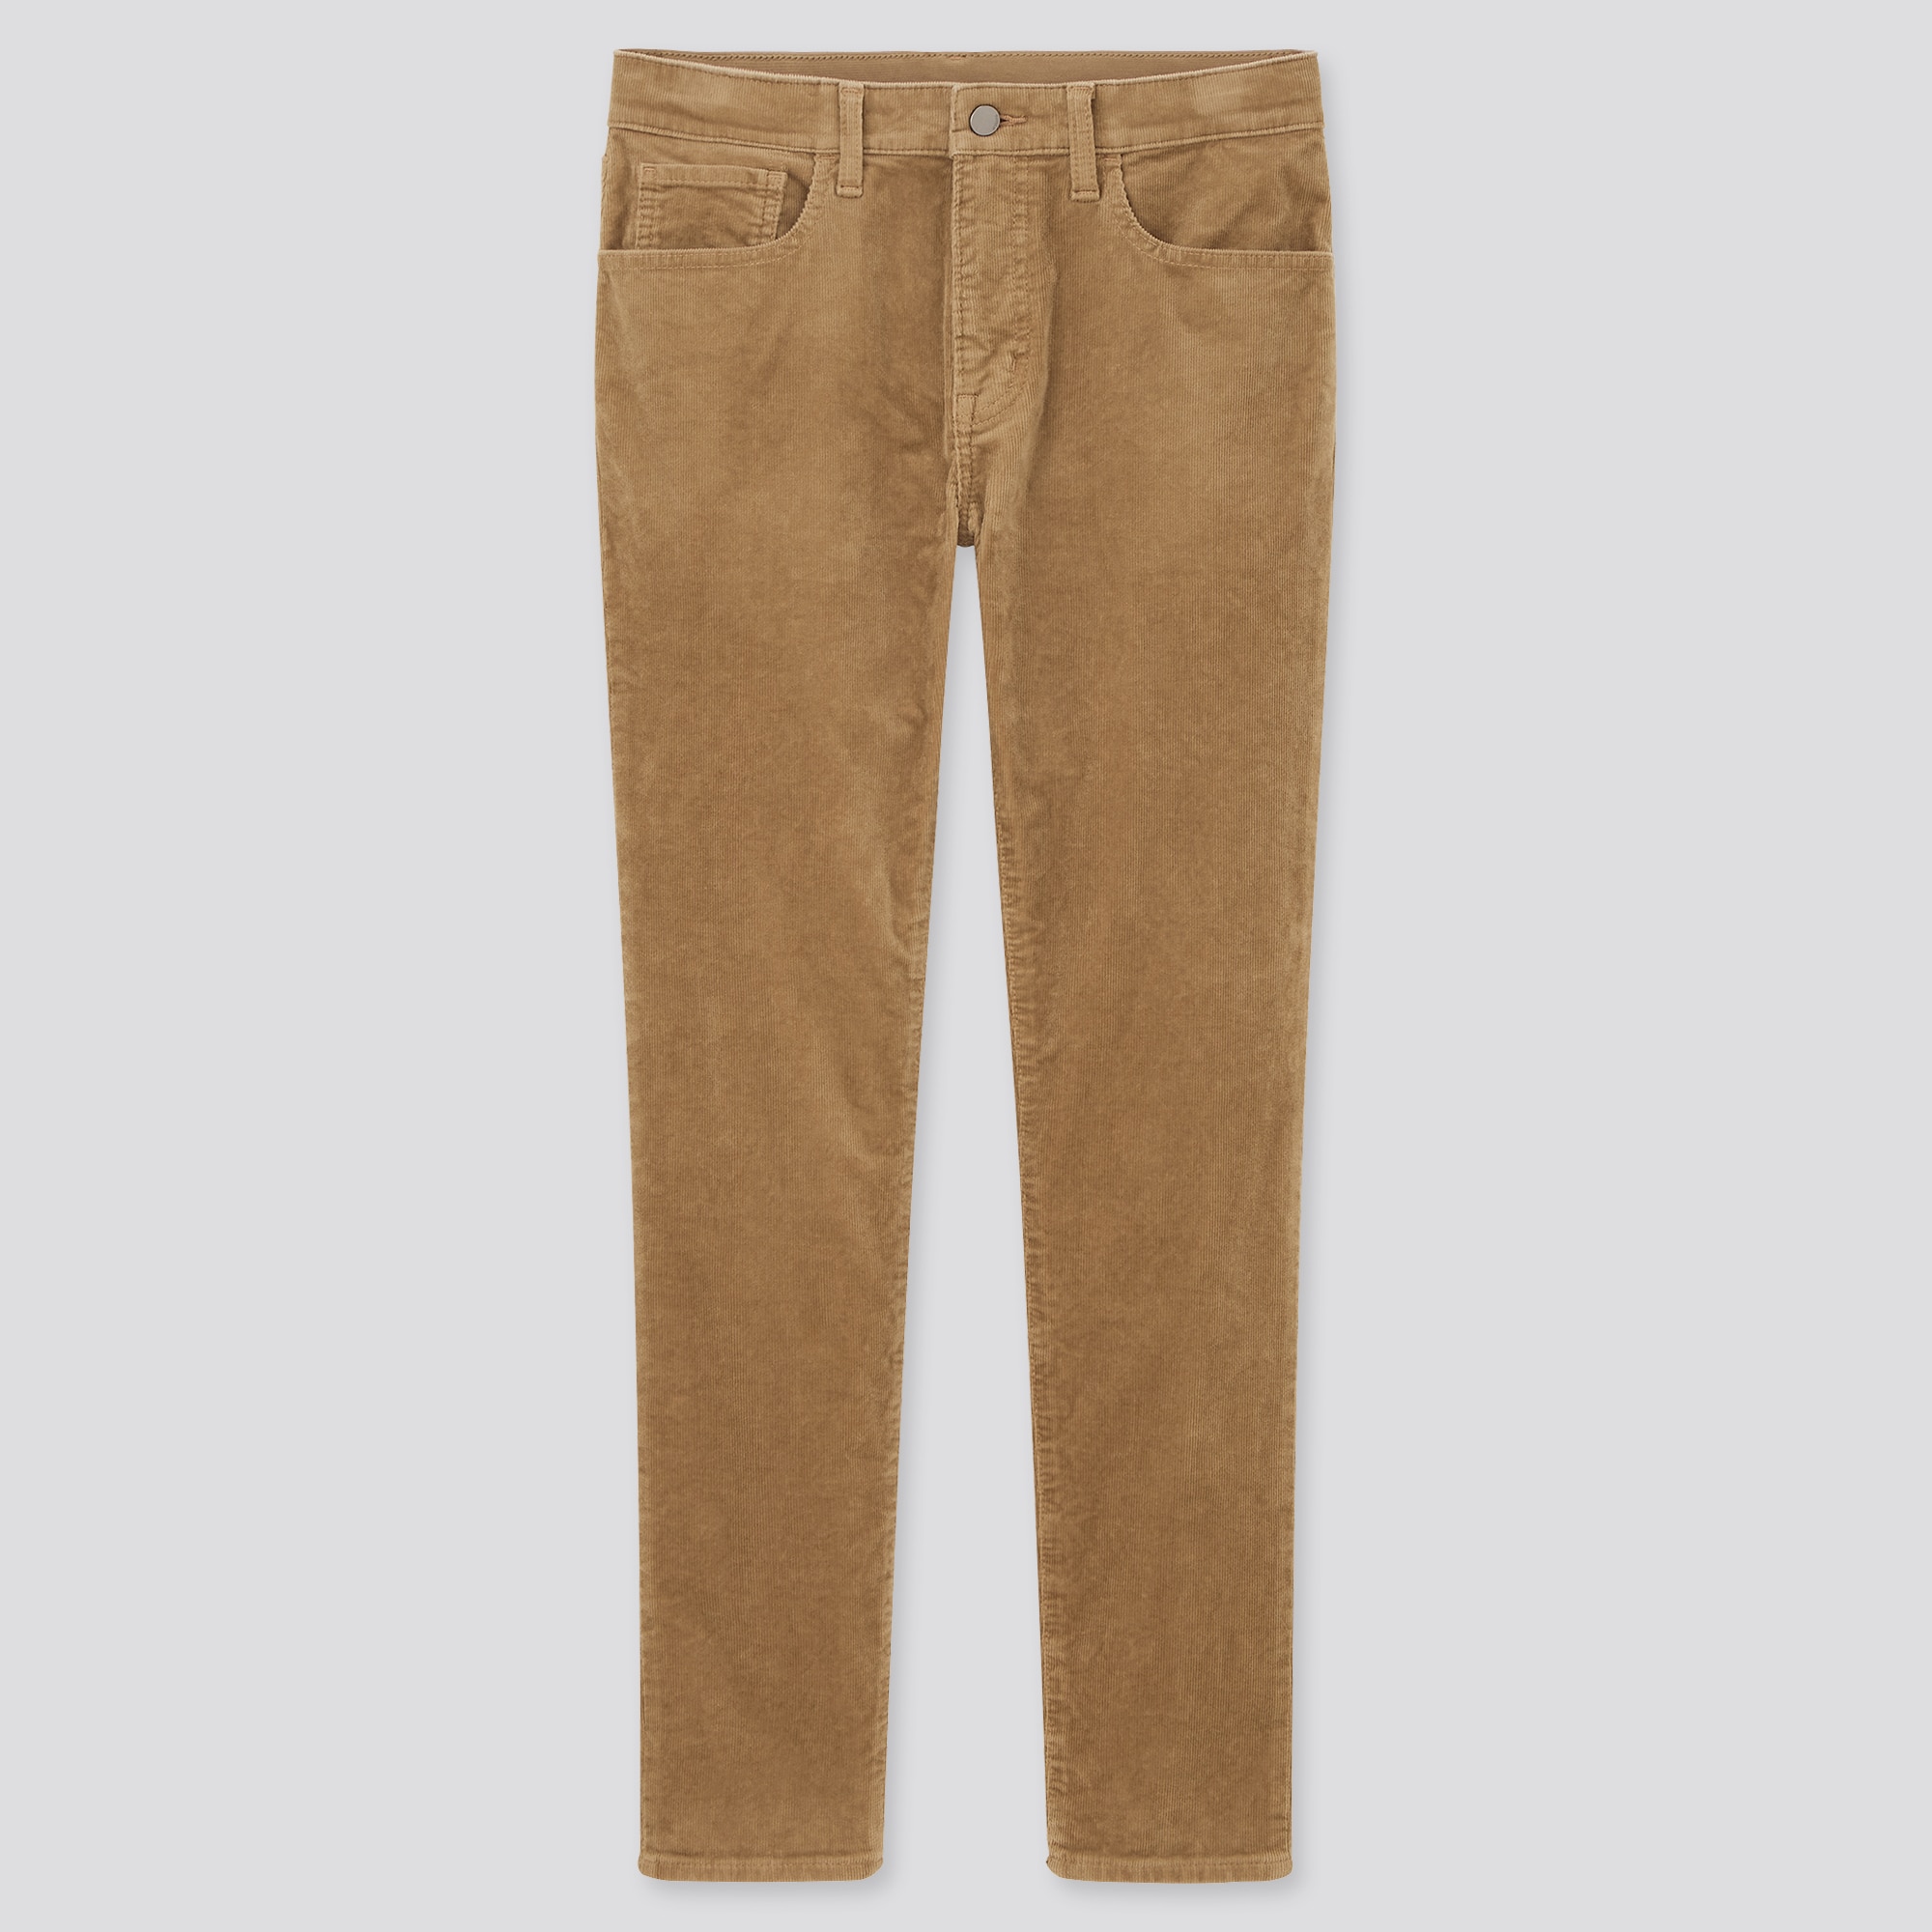 mens stretch cord jeans